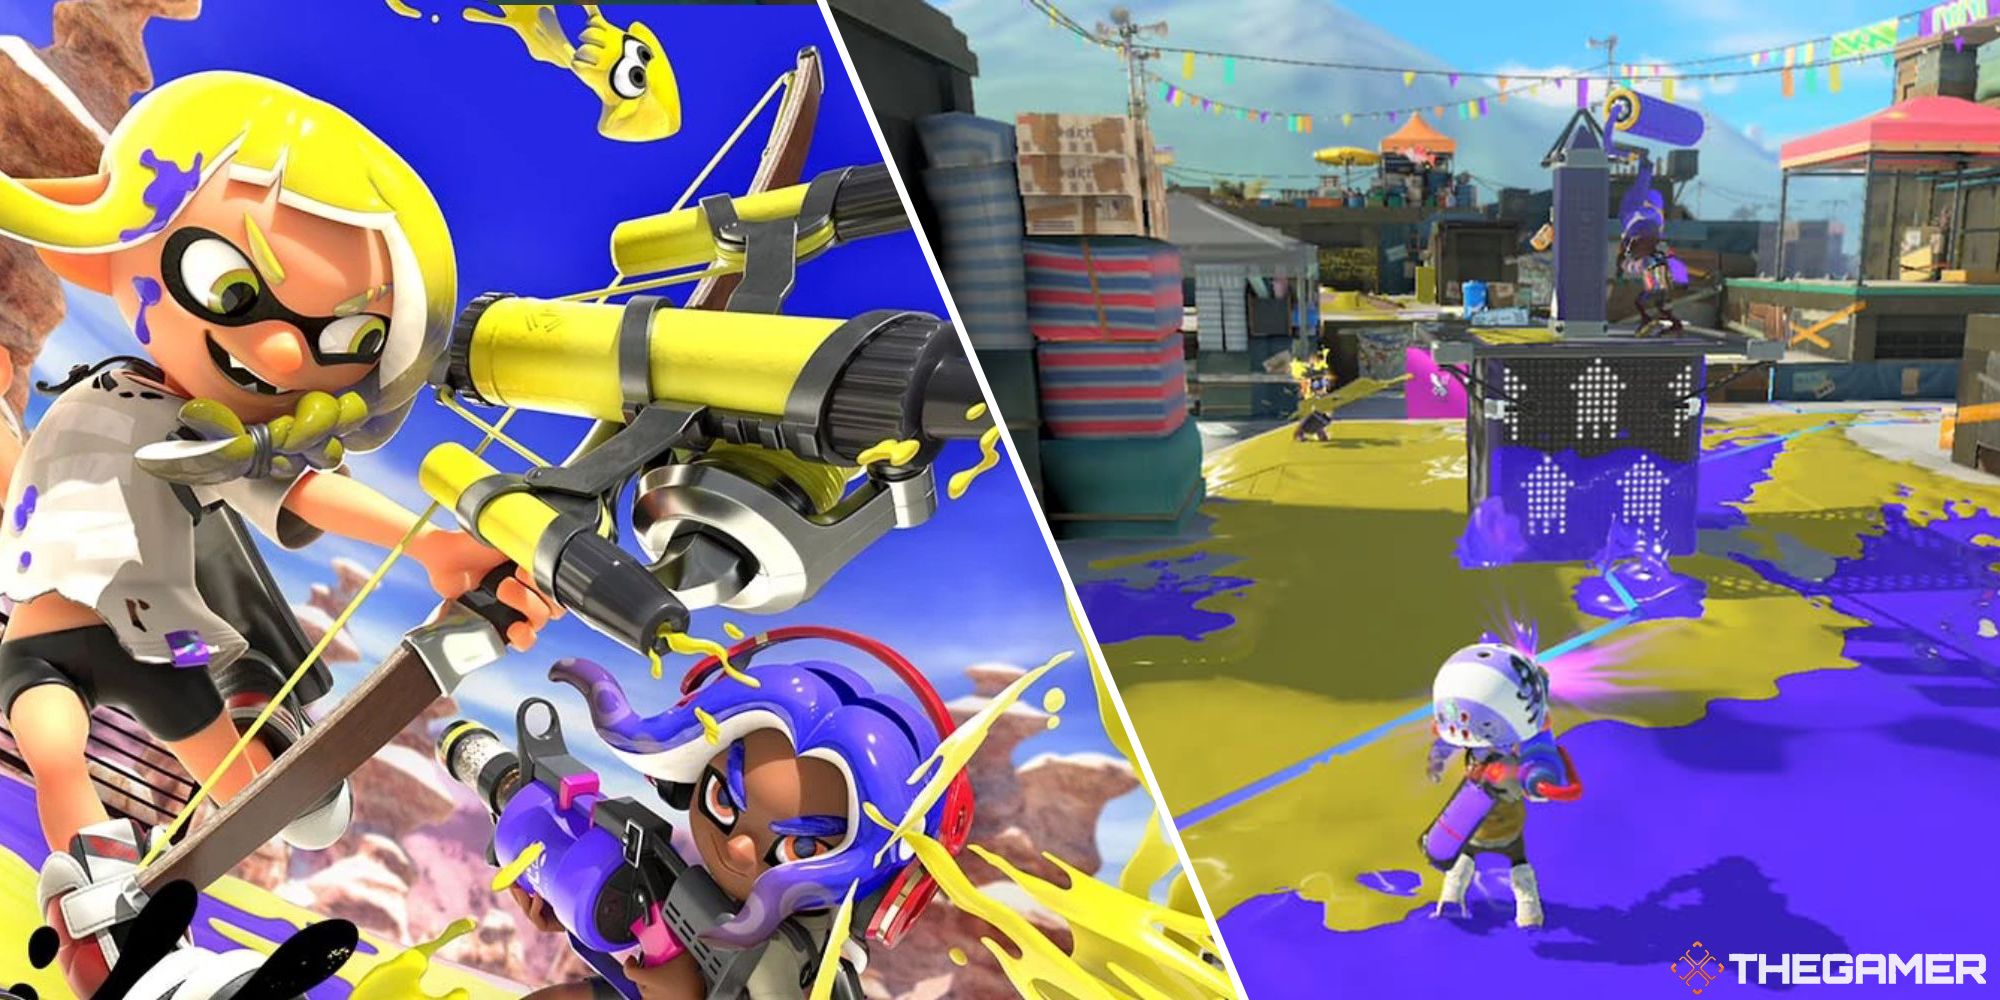 inkling firing splat bow and tower control battle split image